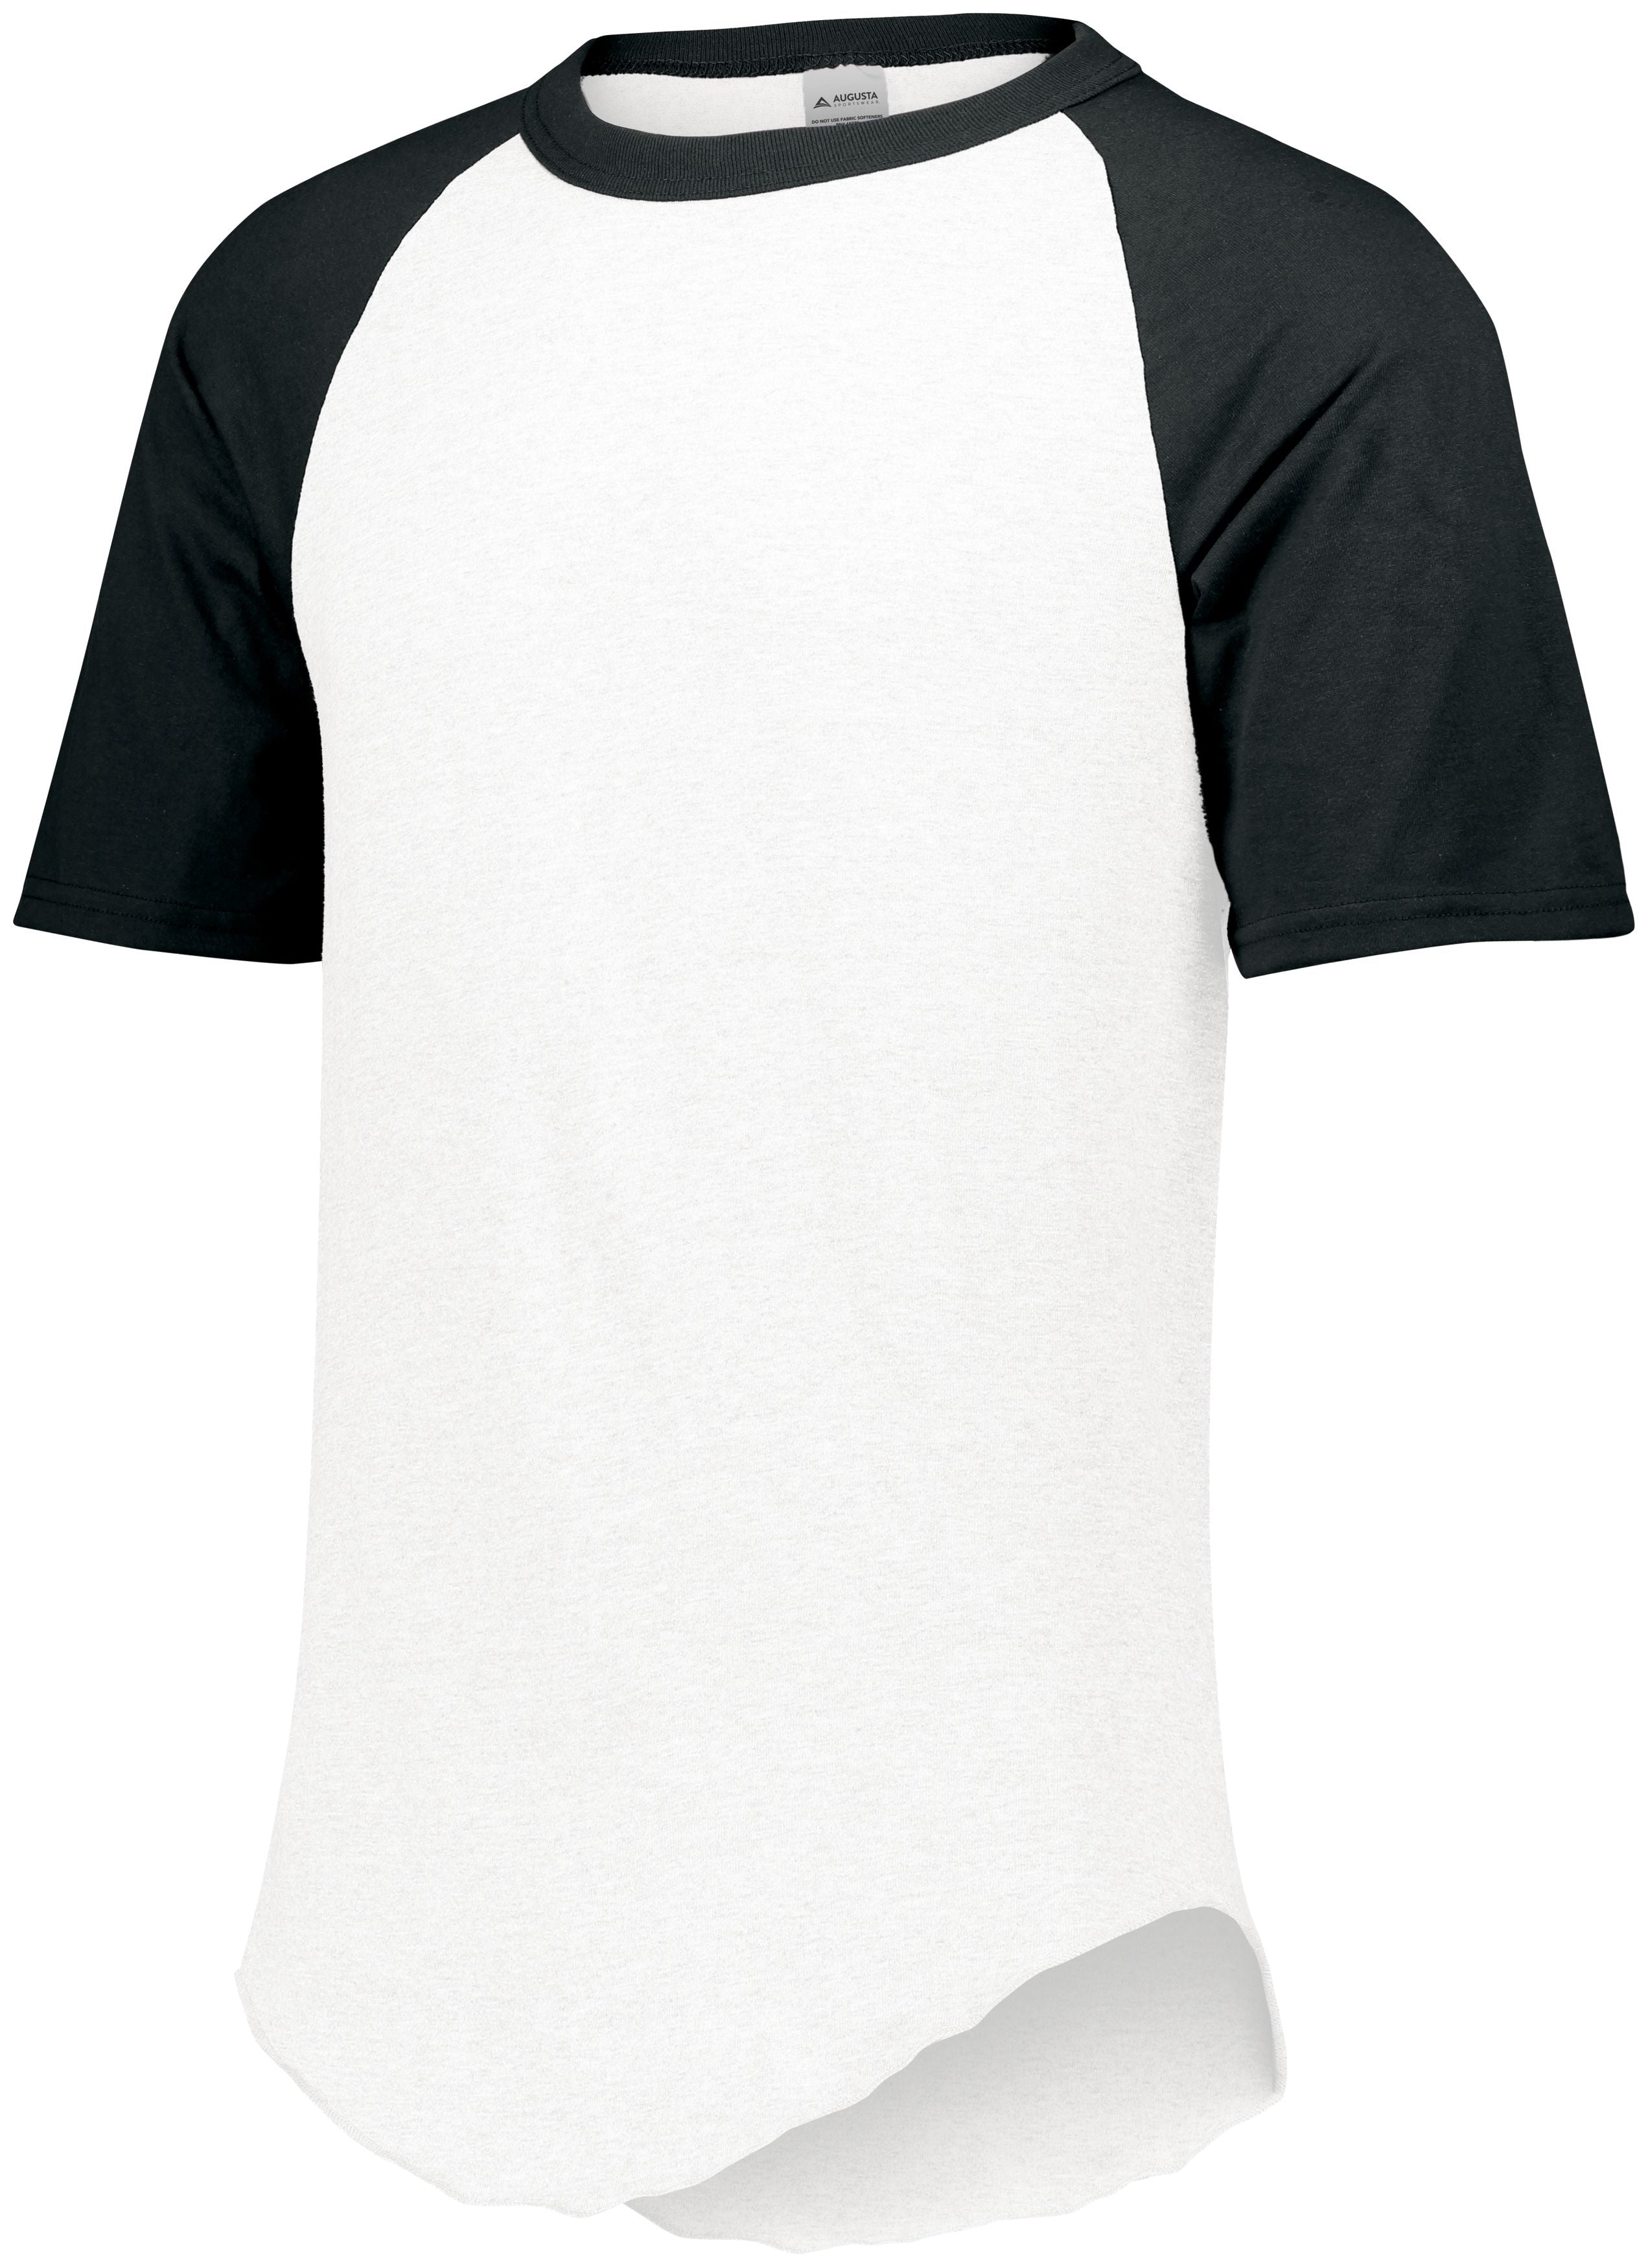 Augusta Sportswear Short Sleeve Baseball Jersey in White/Black  -Part of the Adult, Adult-Jersey, Augusta-Products, Baseball, Shirts, All-Sports, All-Sports-1 product lines at KanaleyCreations.com